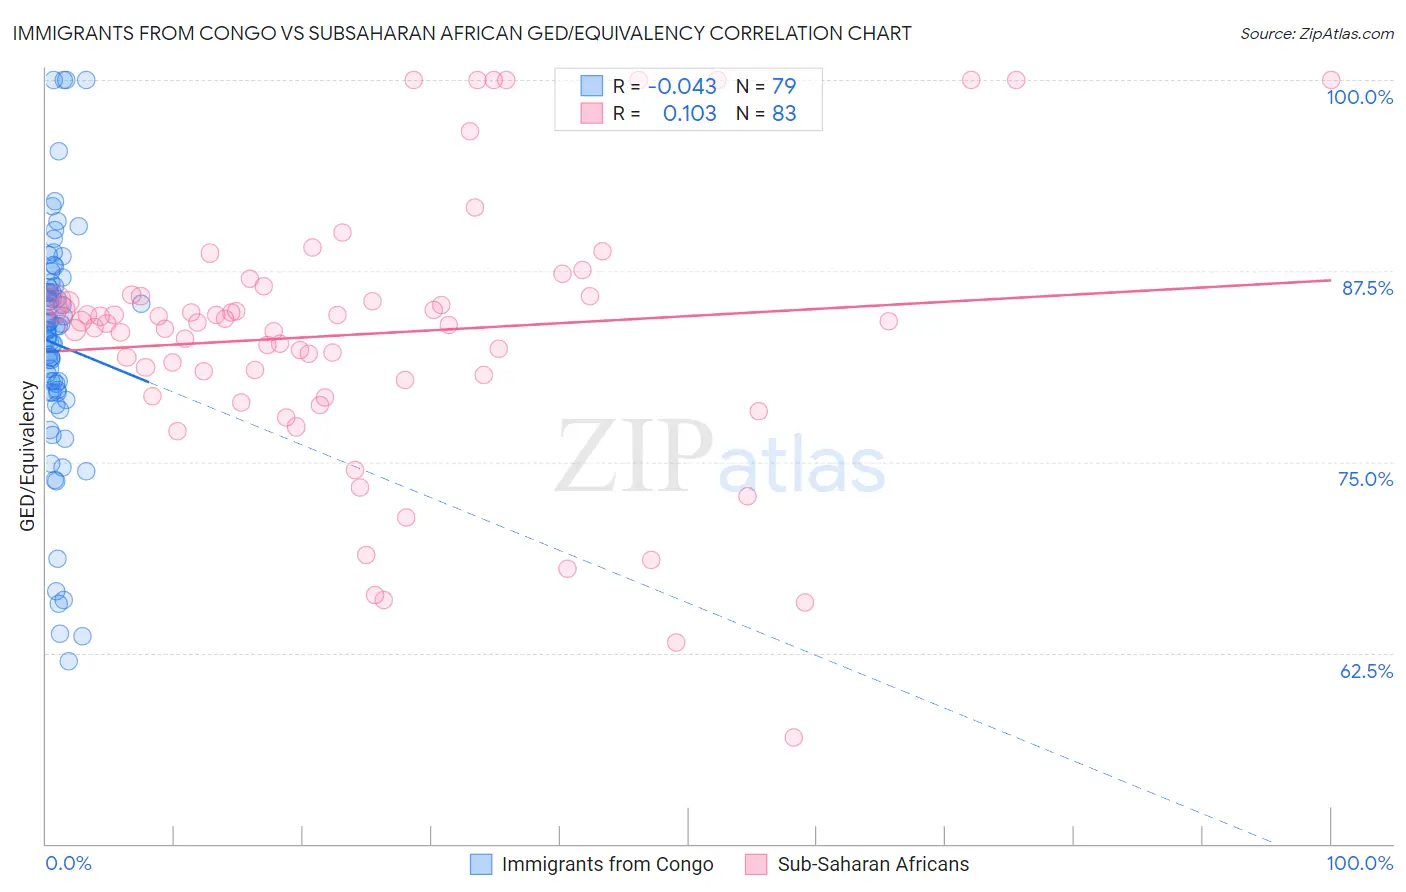 Immigrants from Congo vs Subsaharan African GED/Equivalency